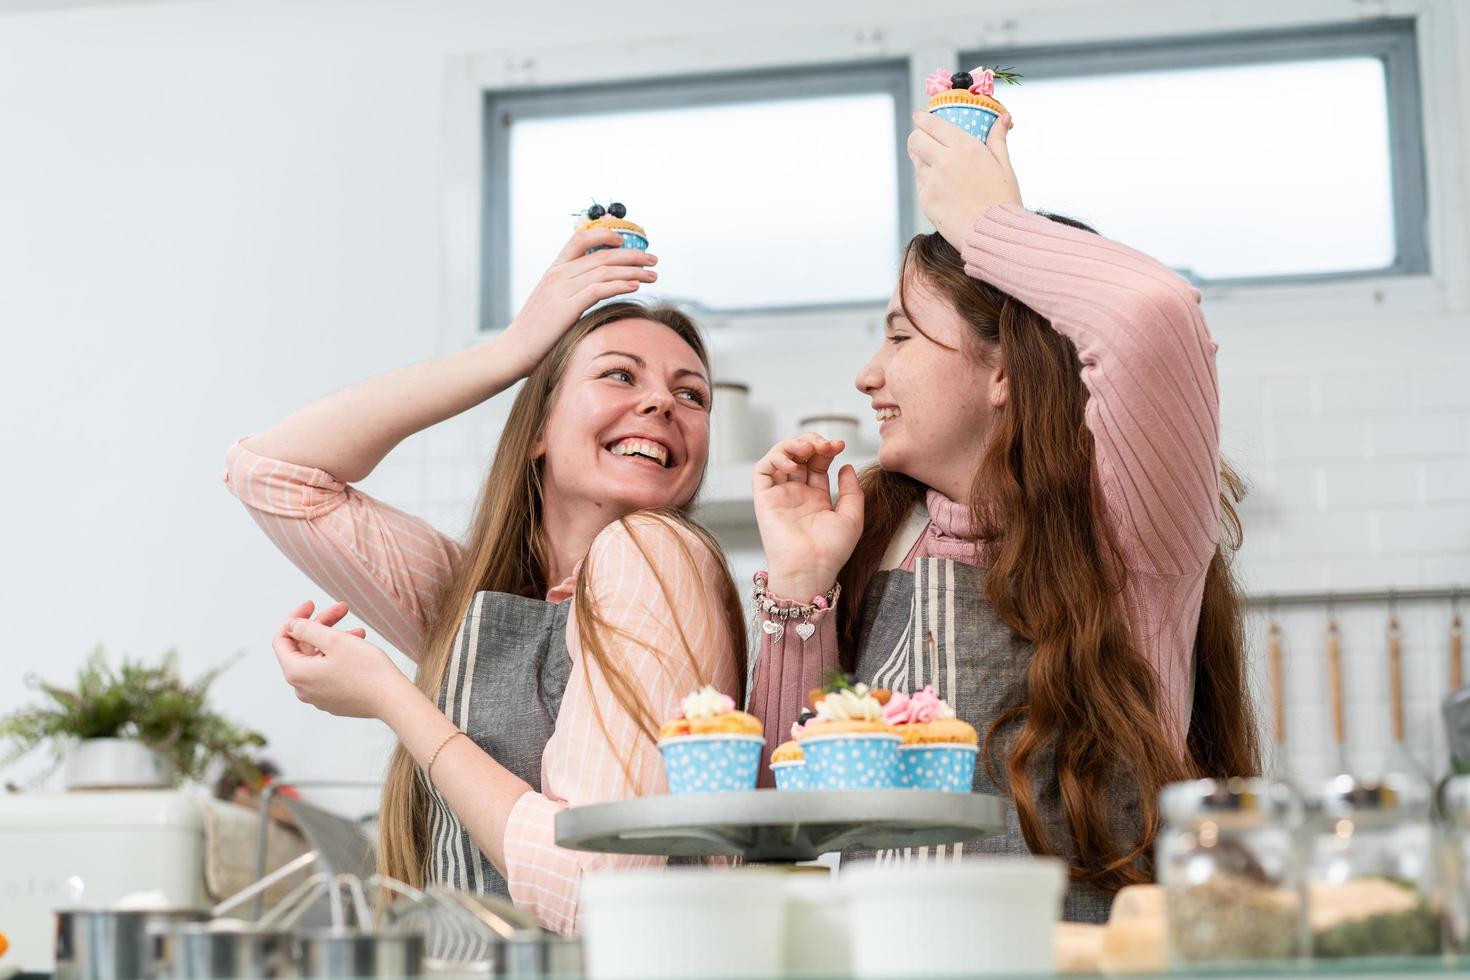 Playful mother and daughter laugh and smile showing cake photo